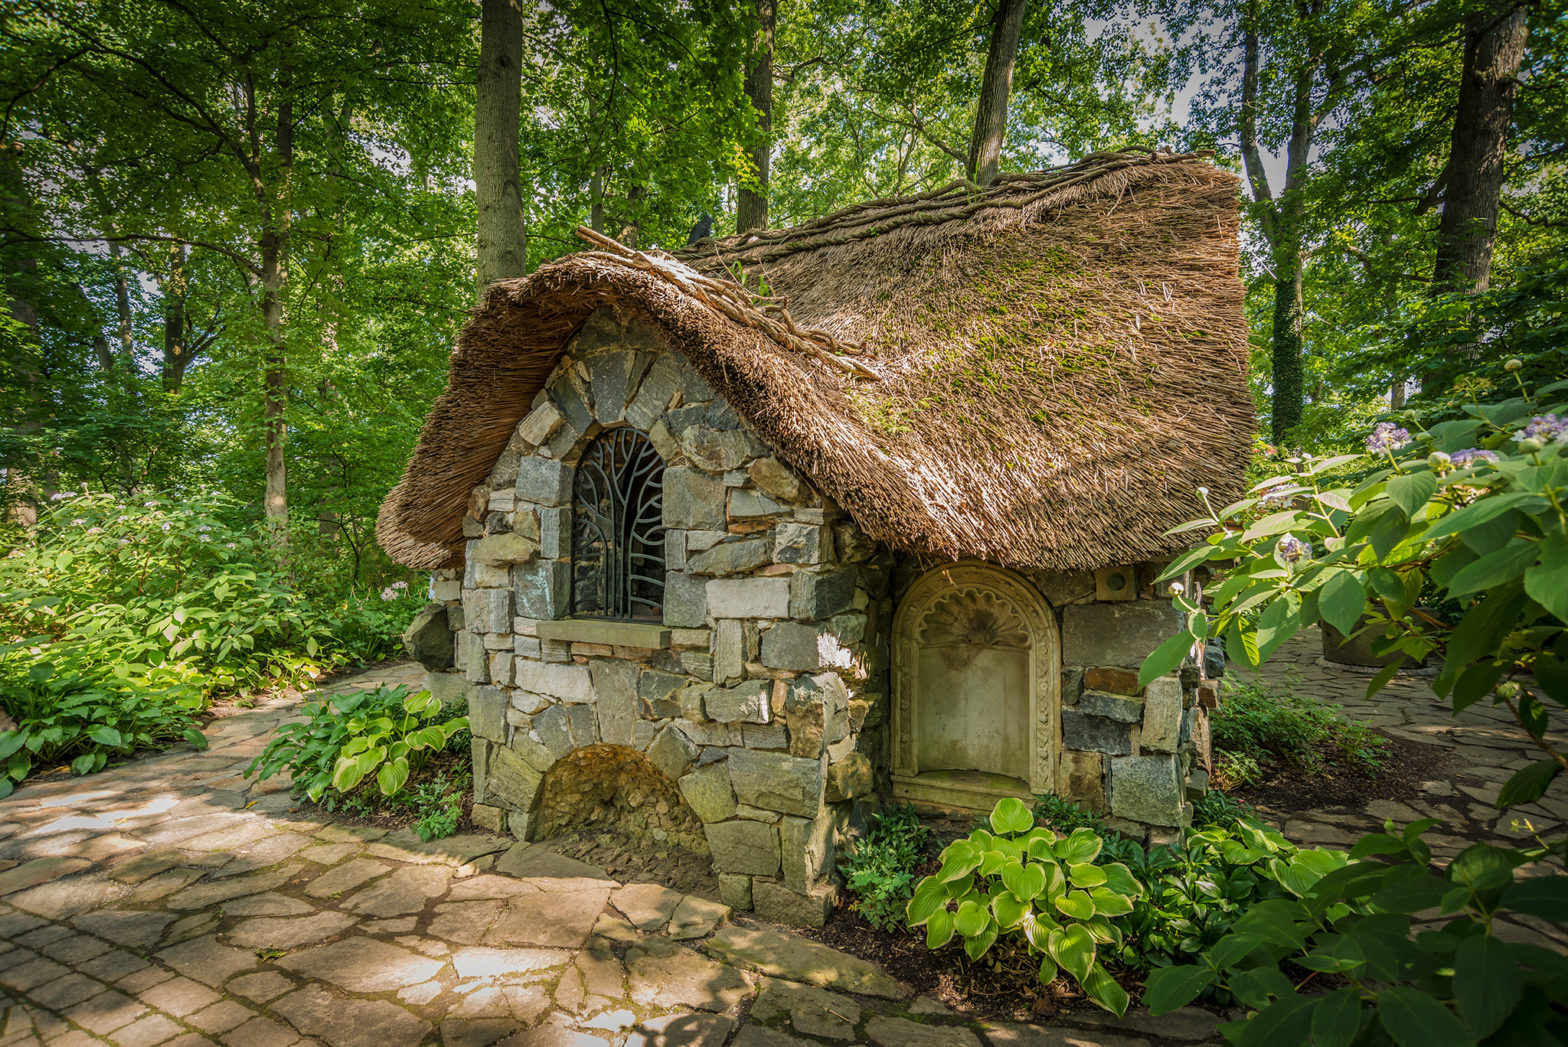 Faerie Cottage with a thatched roof in the Enchanted Woods.